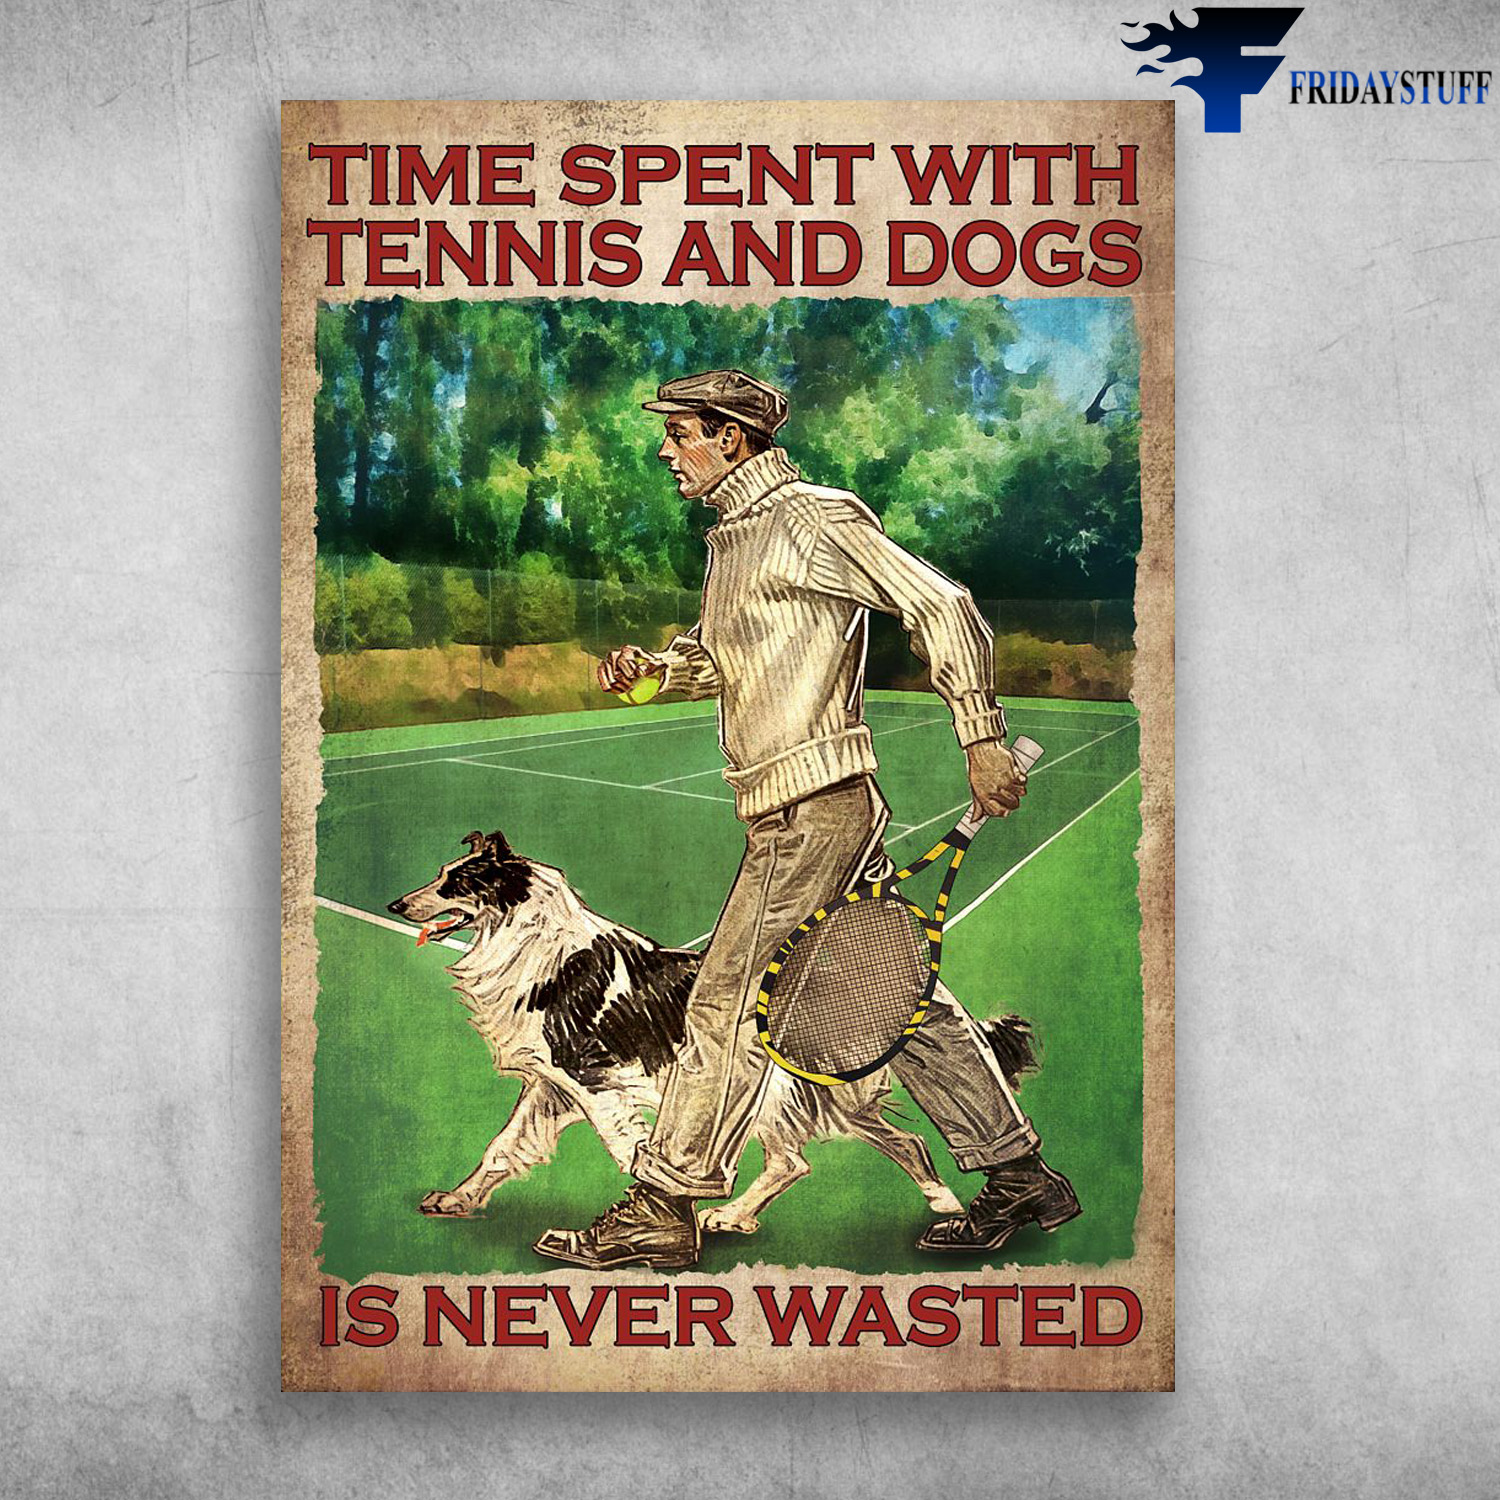 Tennis Player, Tennis Dog - Time Spent With Tennis And Dogs, Is Never Wasted